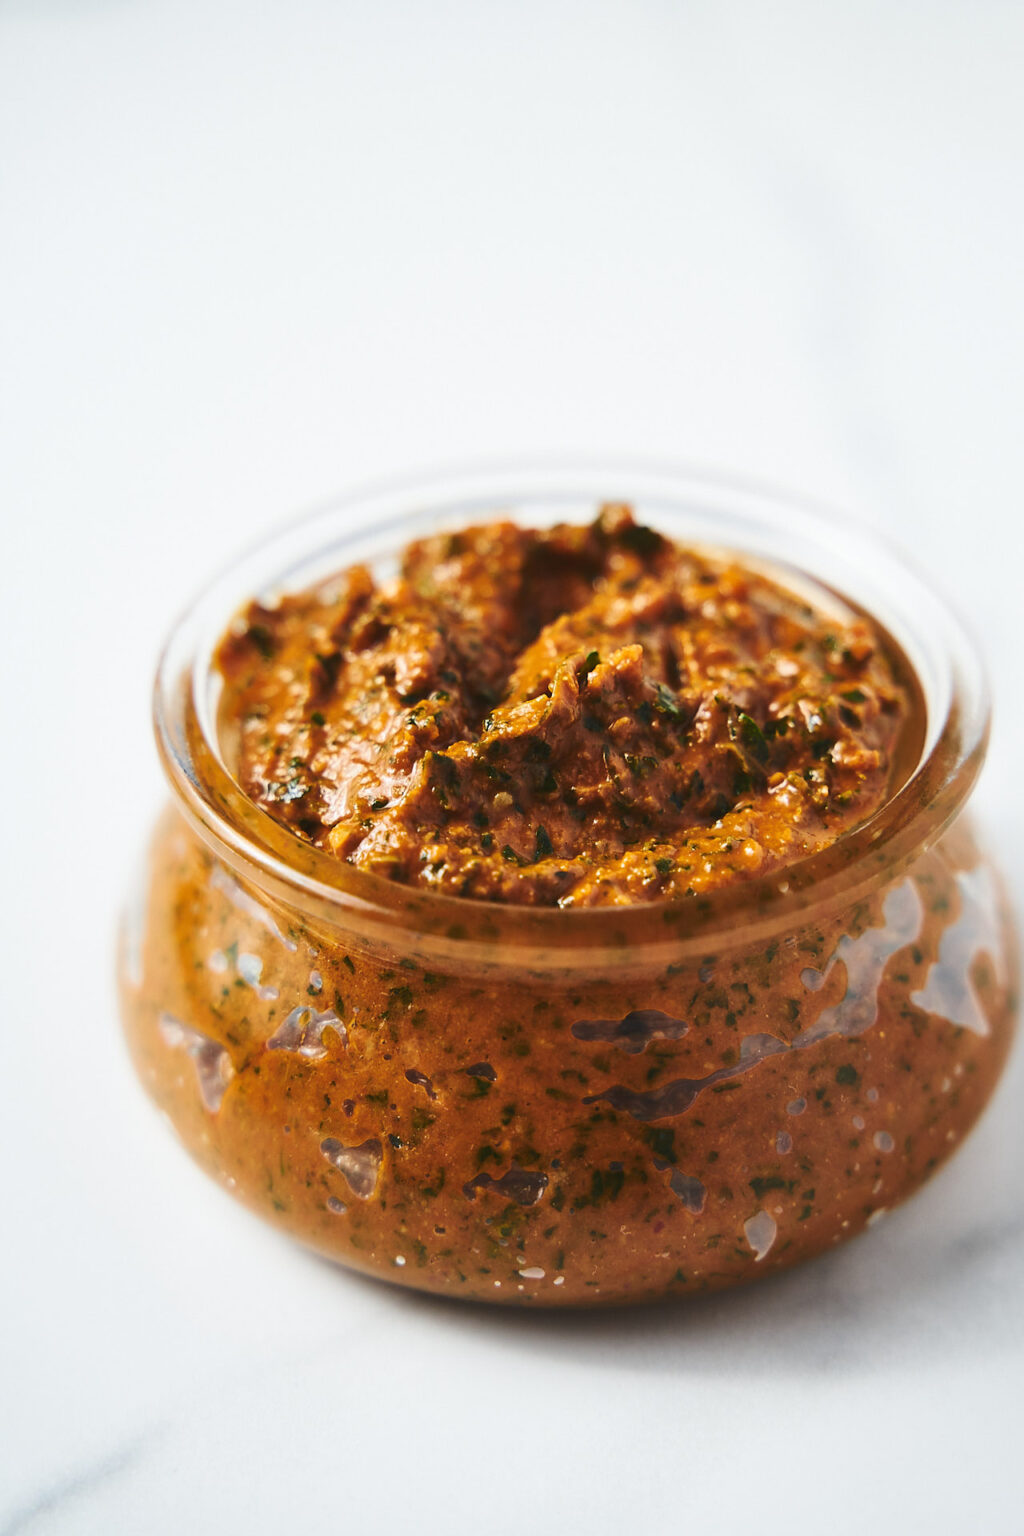 Pesto of roasted bell peppers